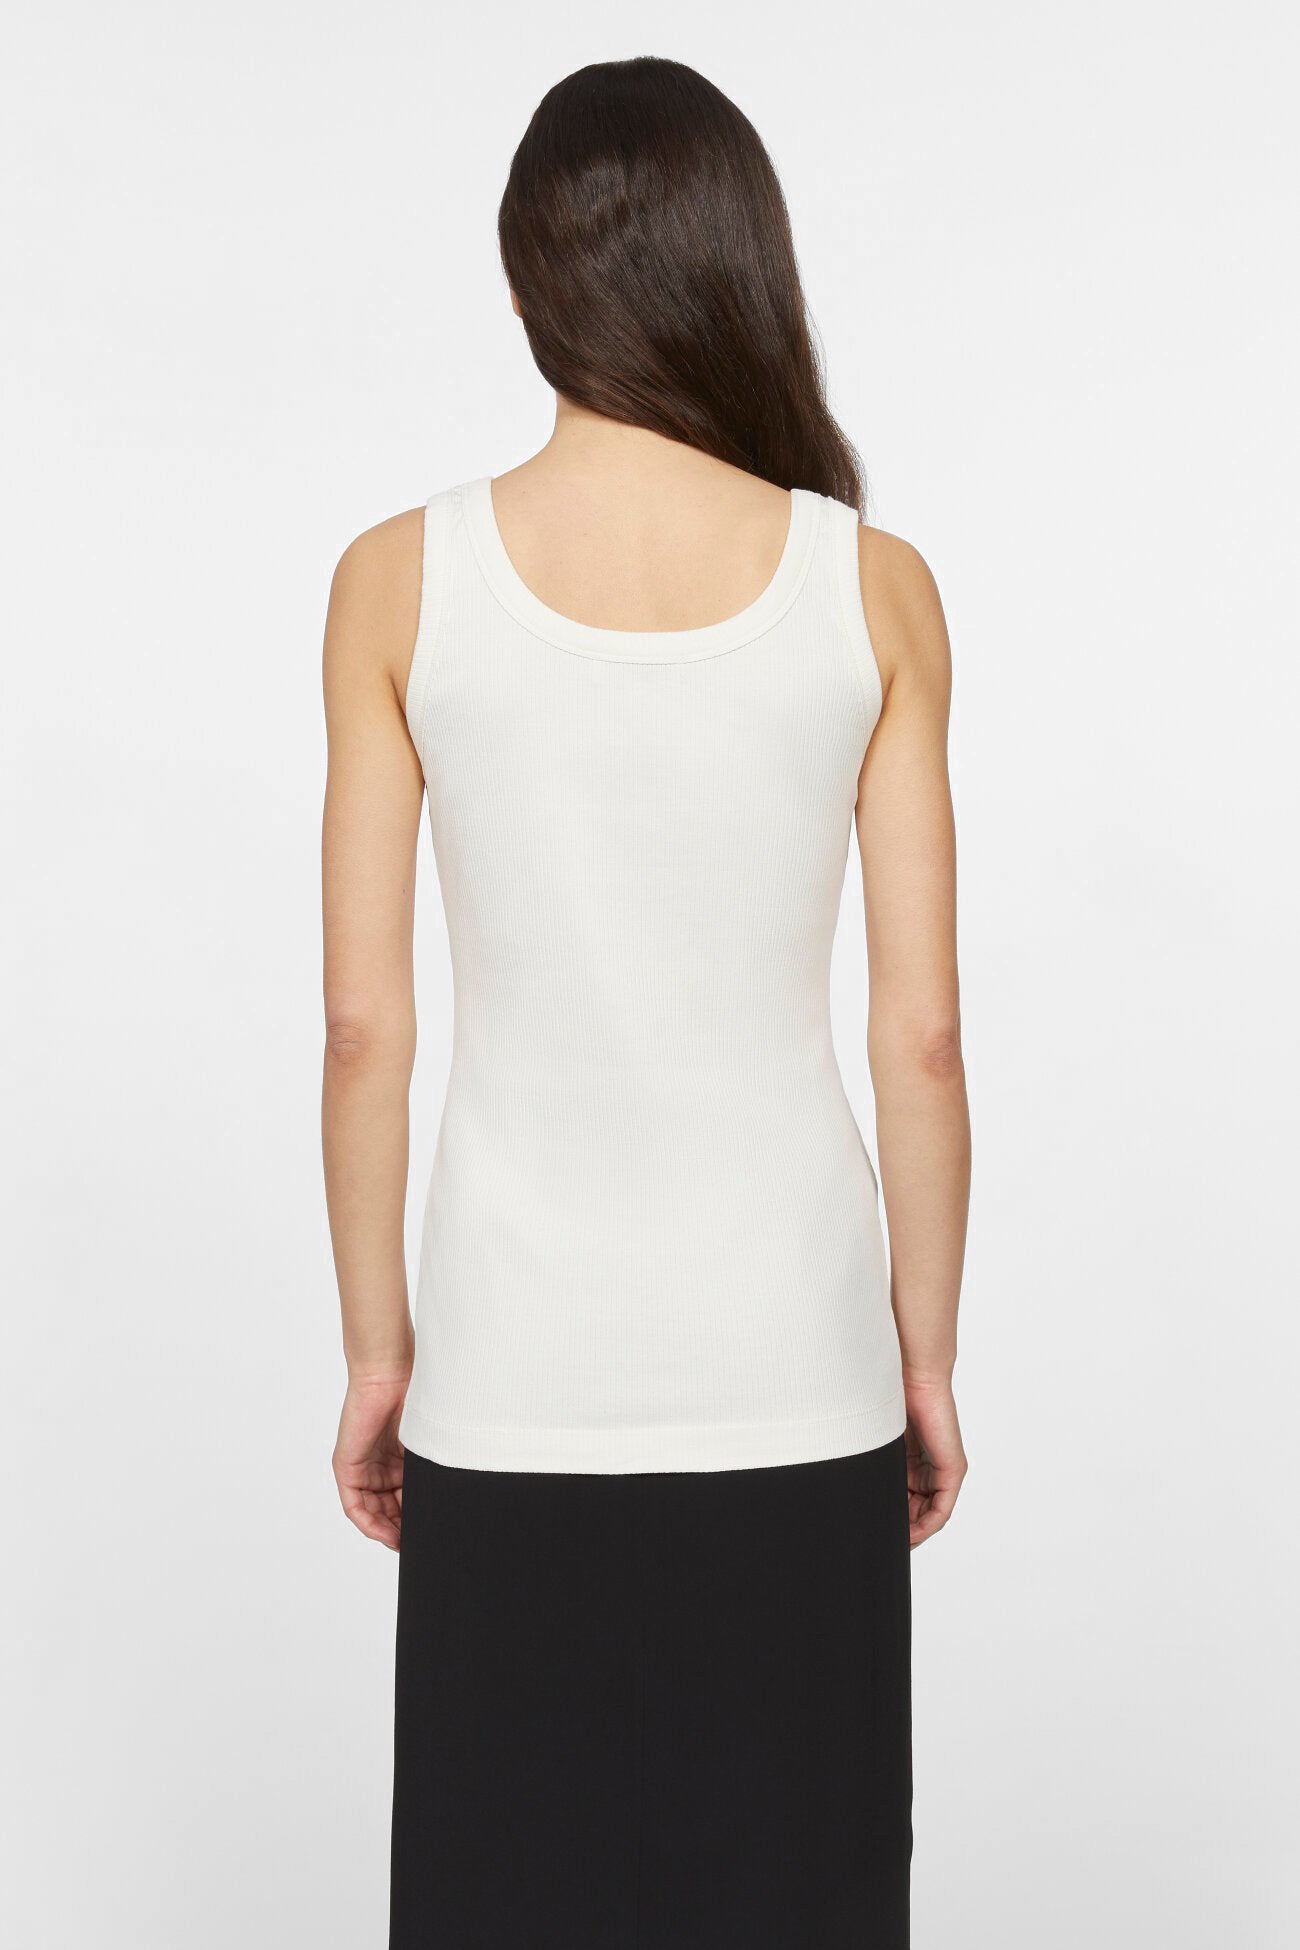 Jump Rib Top in White Organic Cotton by Rodebjer http://www.shoprecital.com